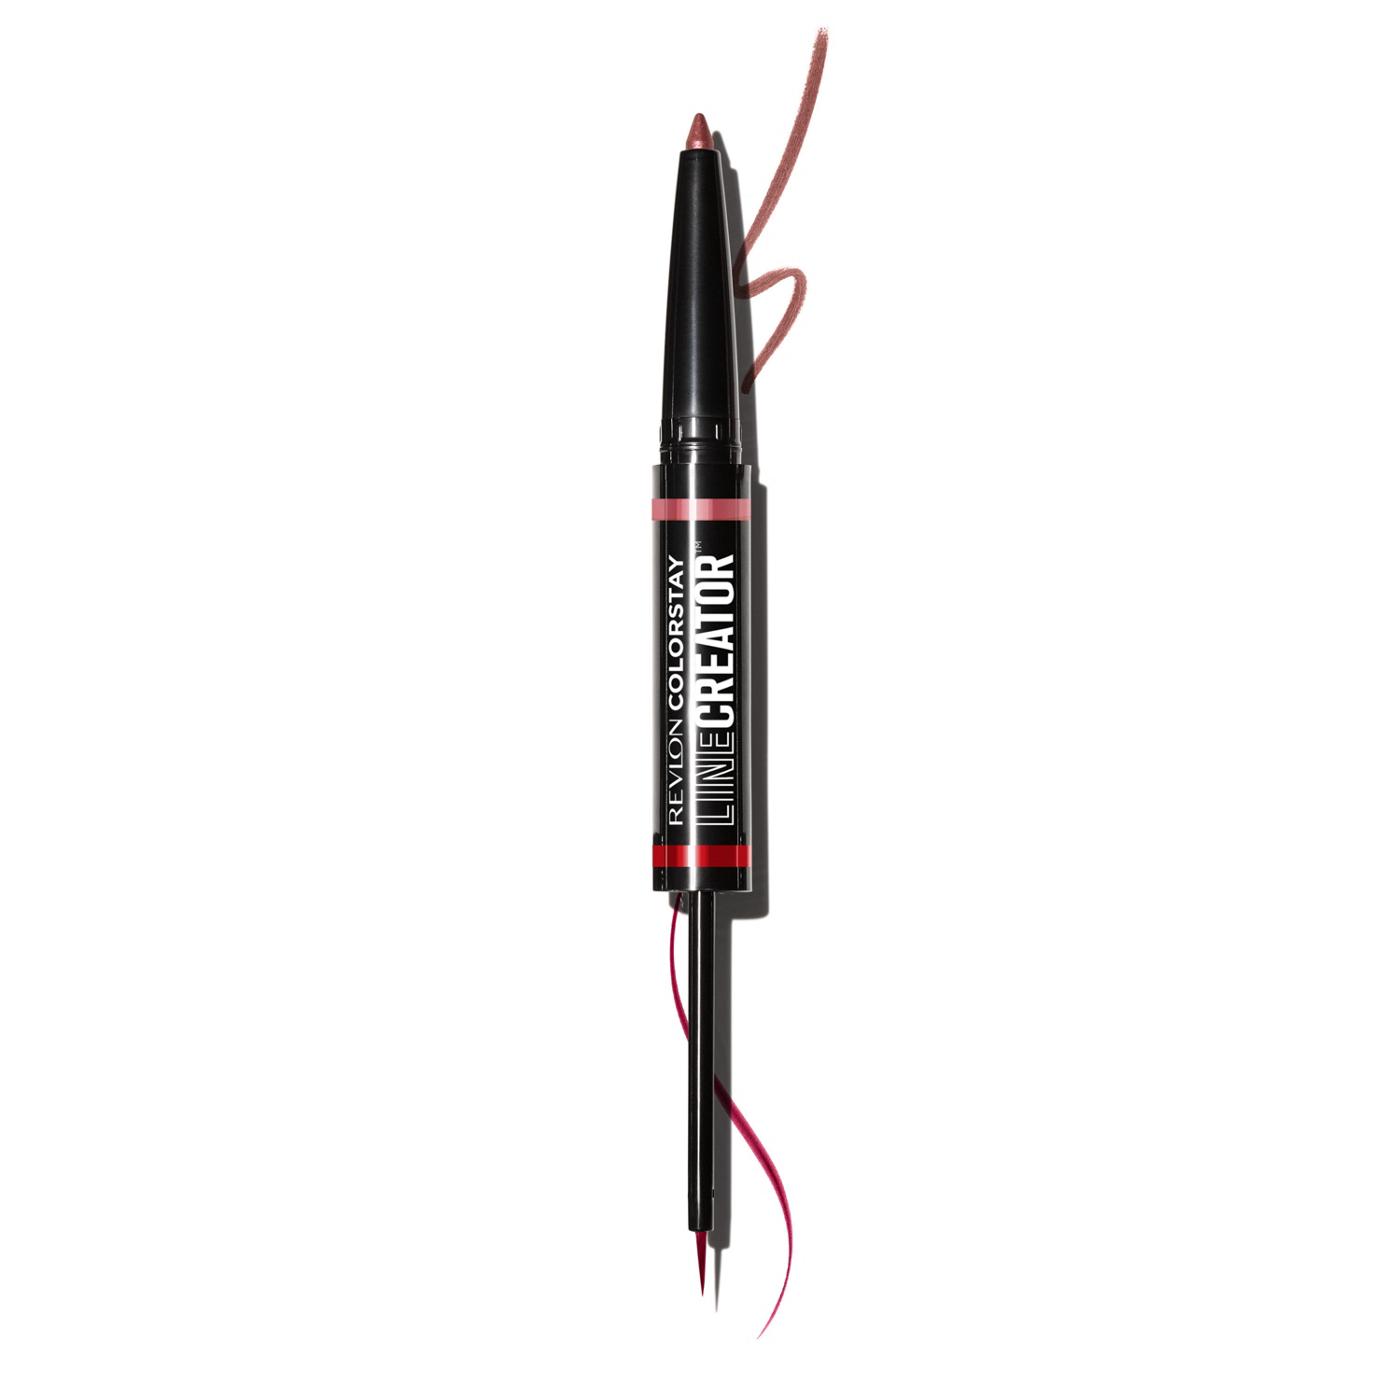 Revlon Colorstay Line Creator Double Ended Liner, She Fire; image 4 of 4